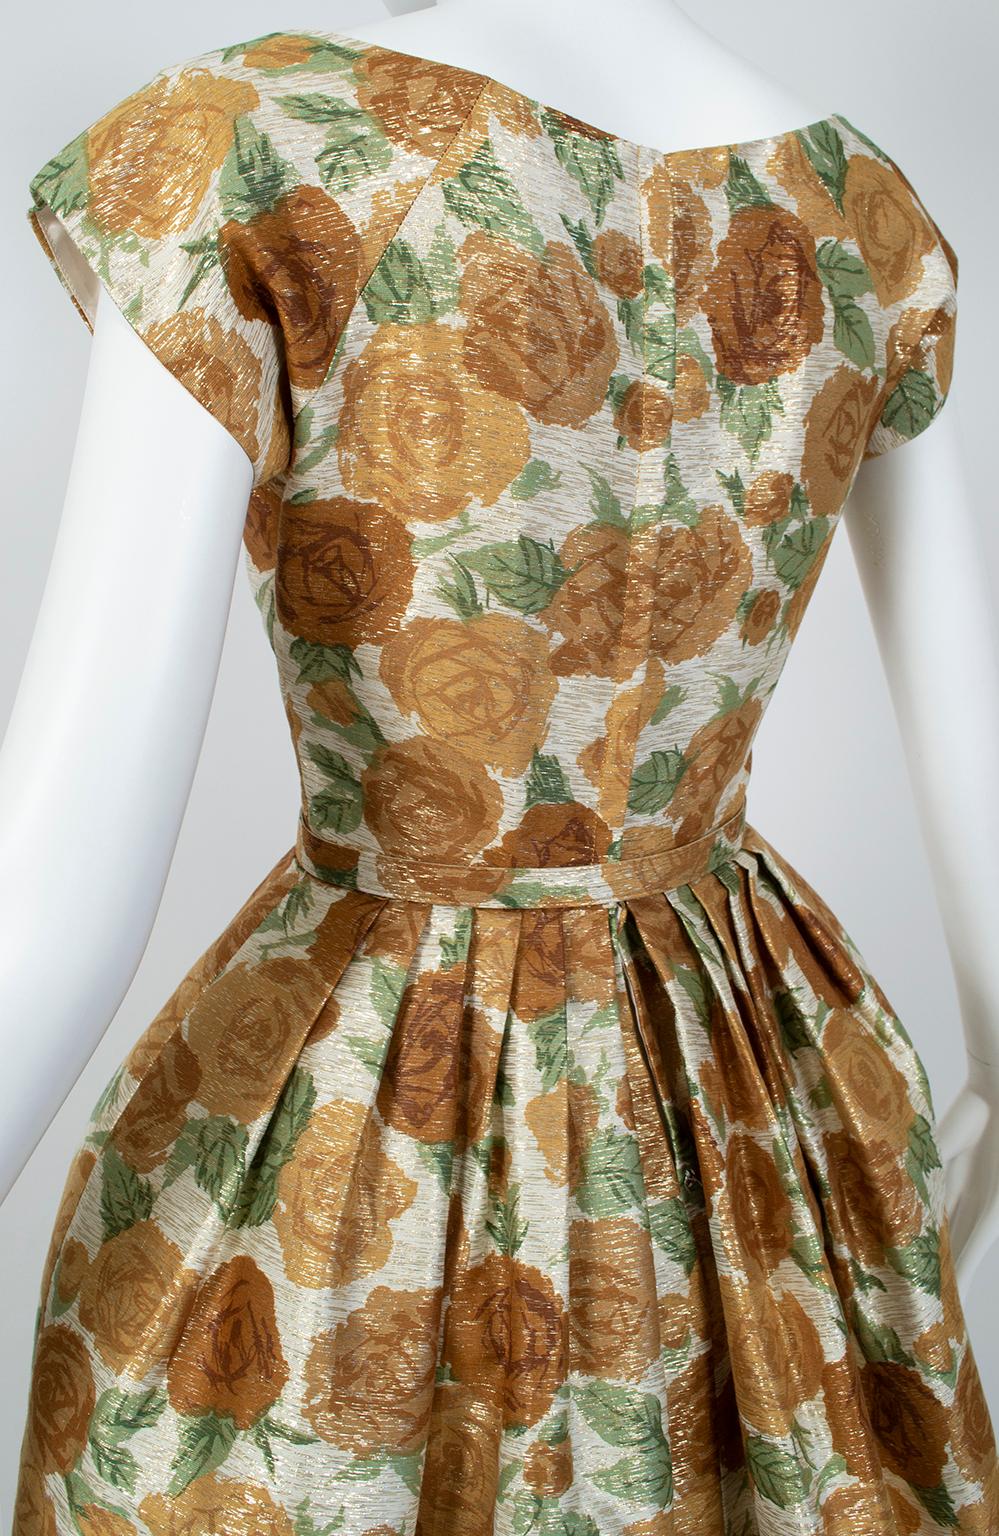 Brown Metallic Green and Gold Floral Cocktail Dress w Lampshade Hobble Skirt- S, 1950s